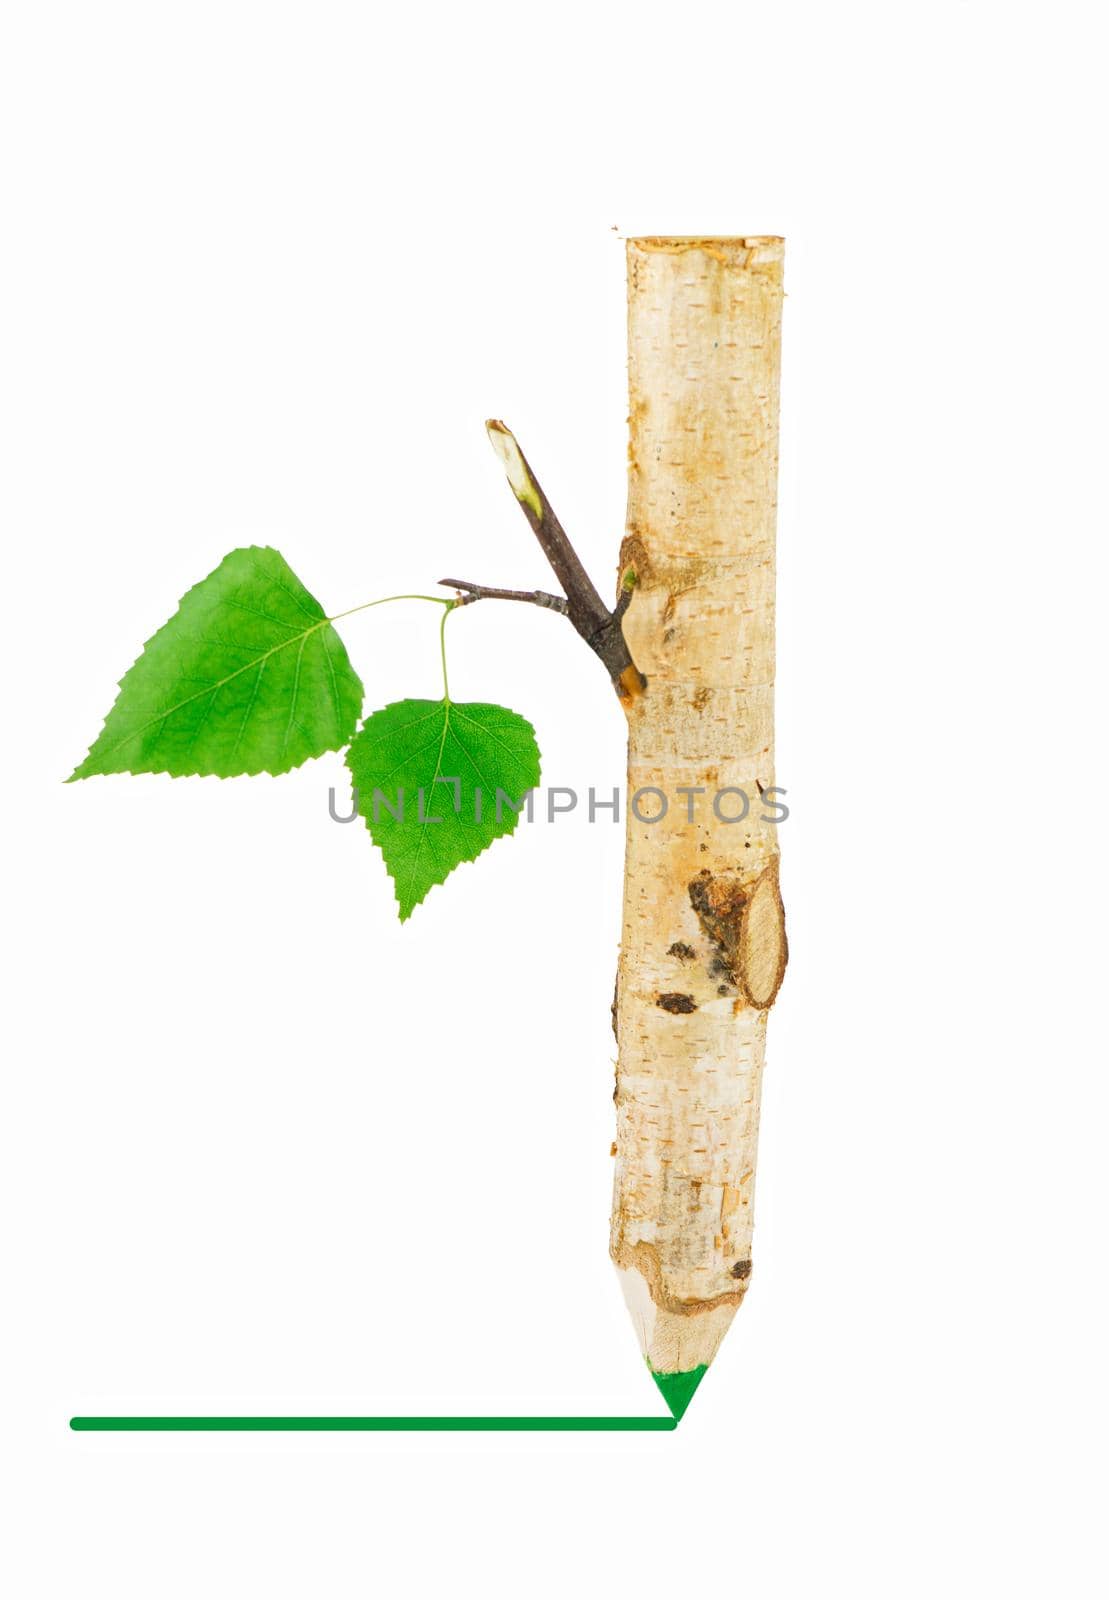 Wooden pencil with leaf. photo can be used as natural backdrop by aprilphoto